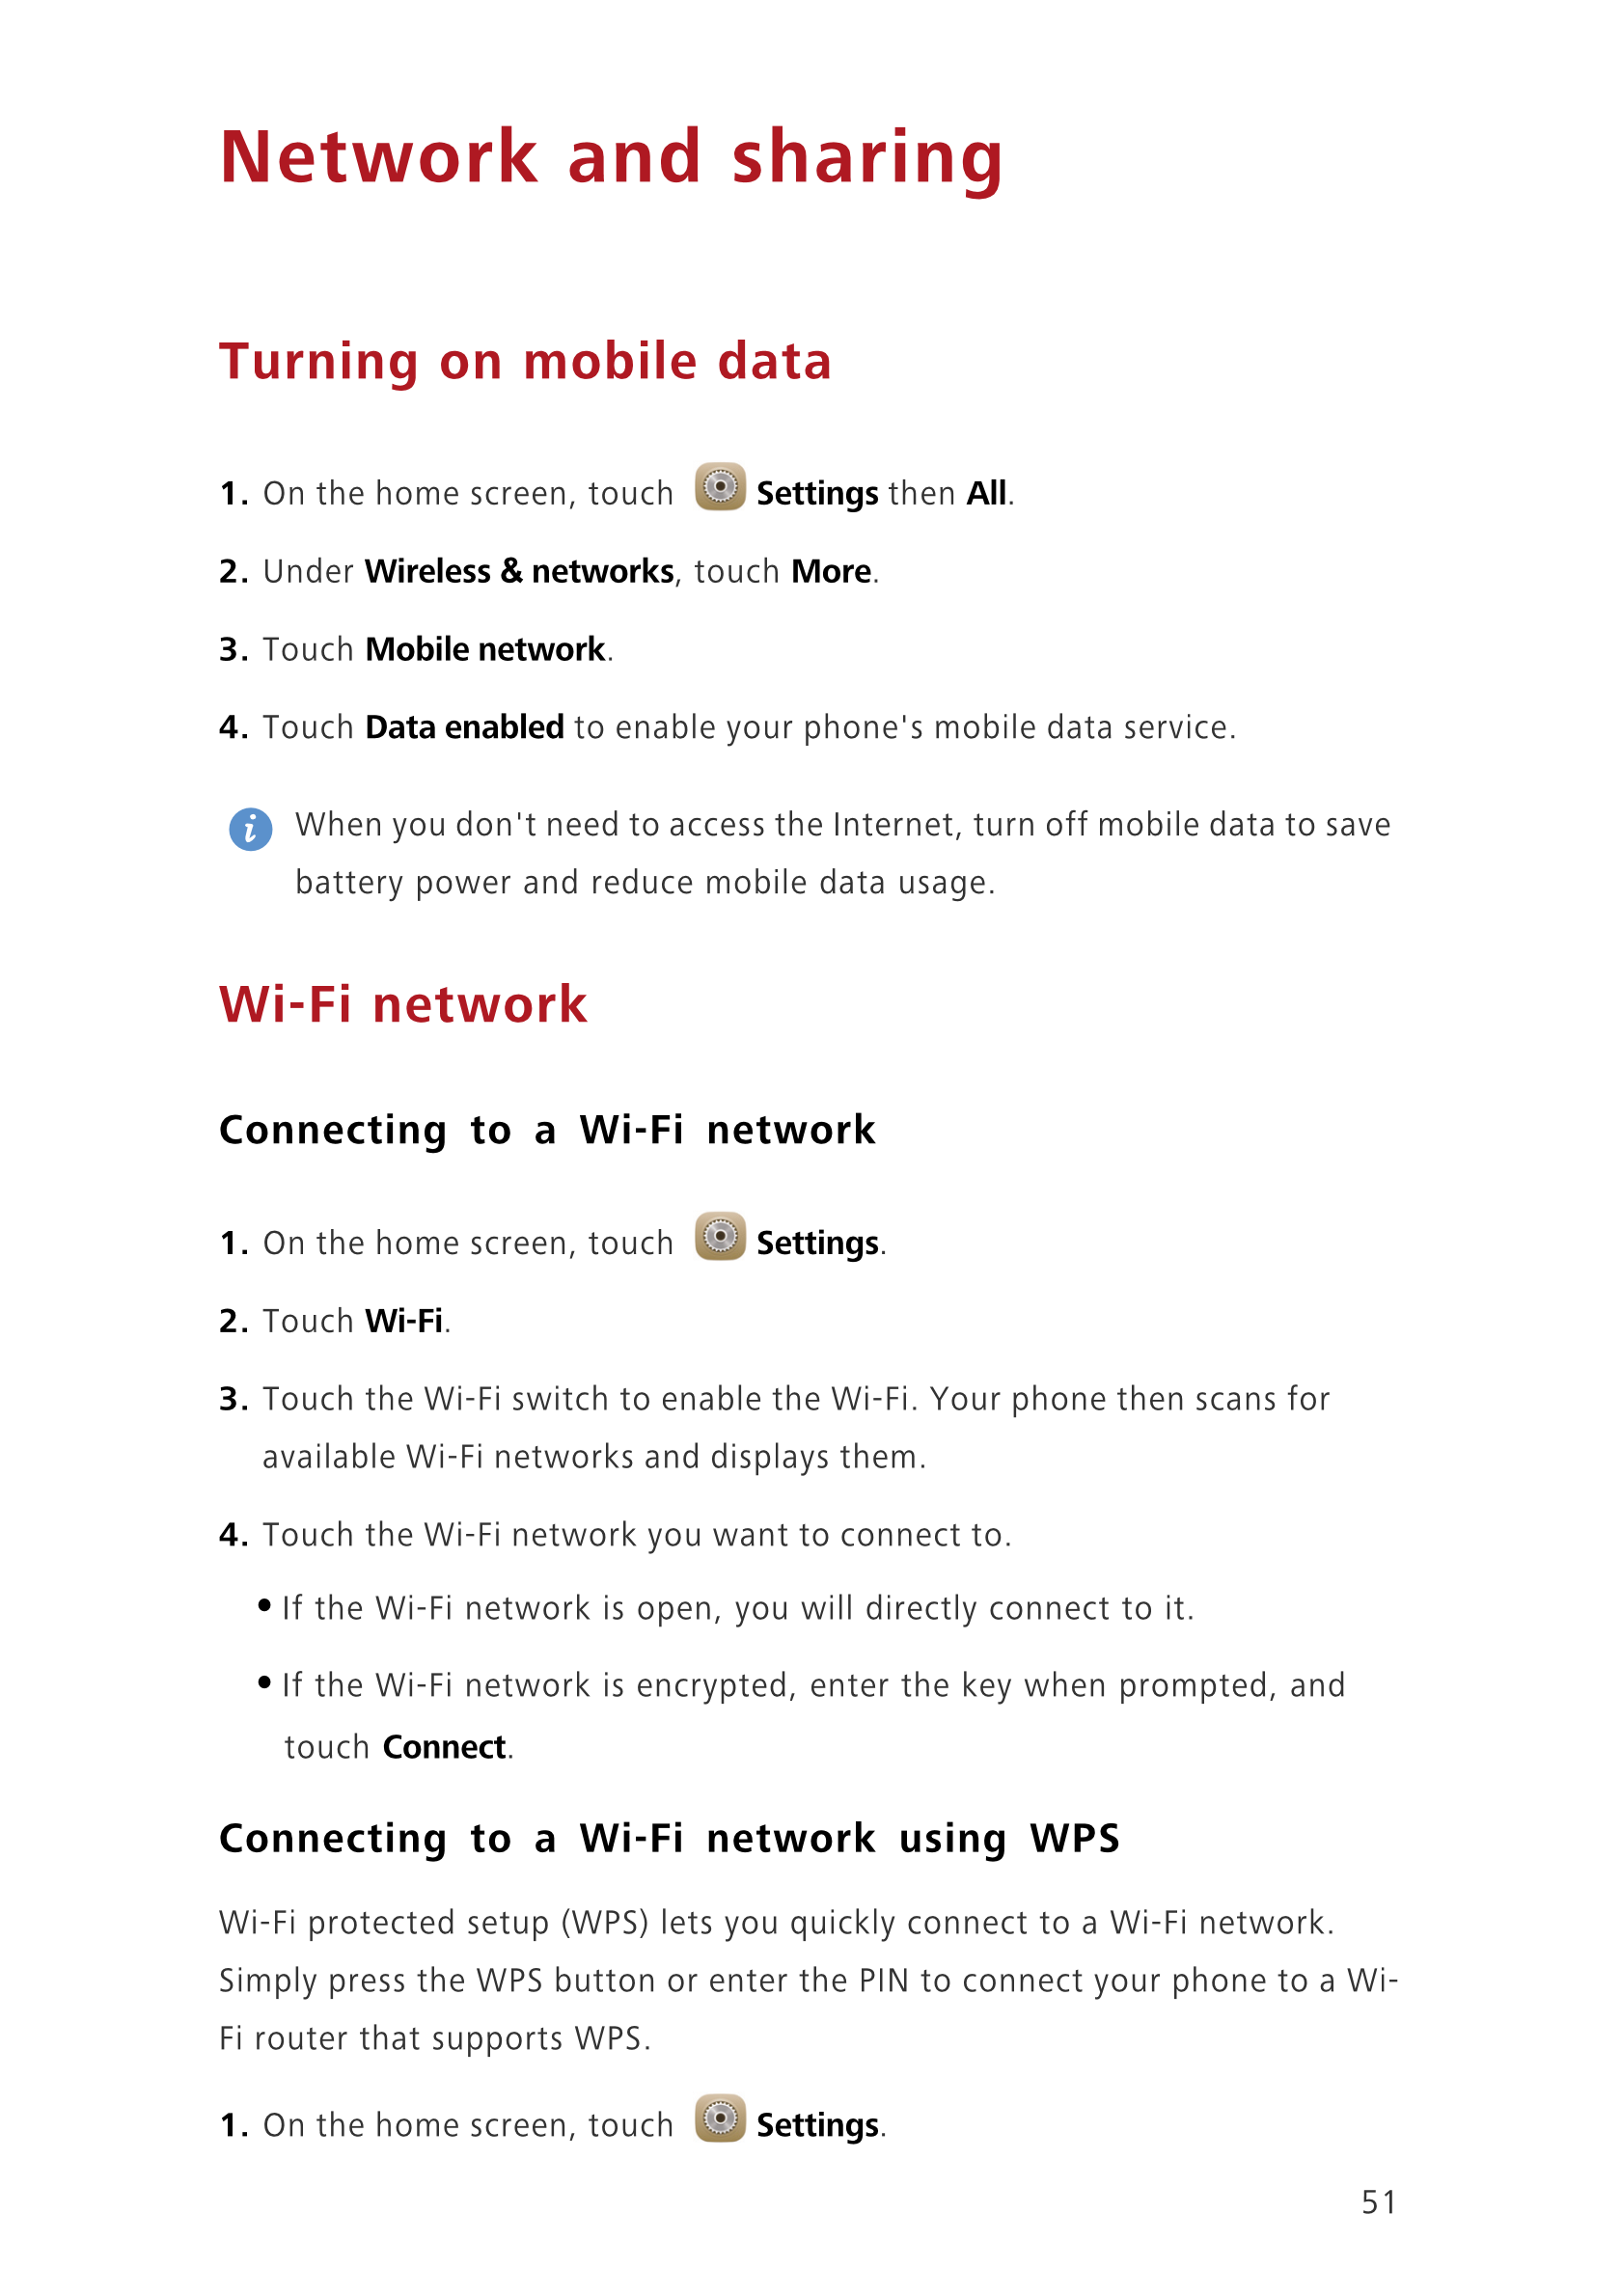 Network and sharing
Turning on mobile data
1.  On the home screen, touch  Settings then  All.
2.  Under  Wireless  & networks, t